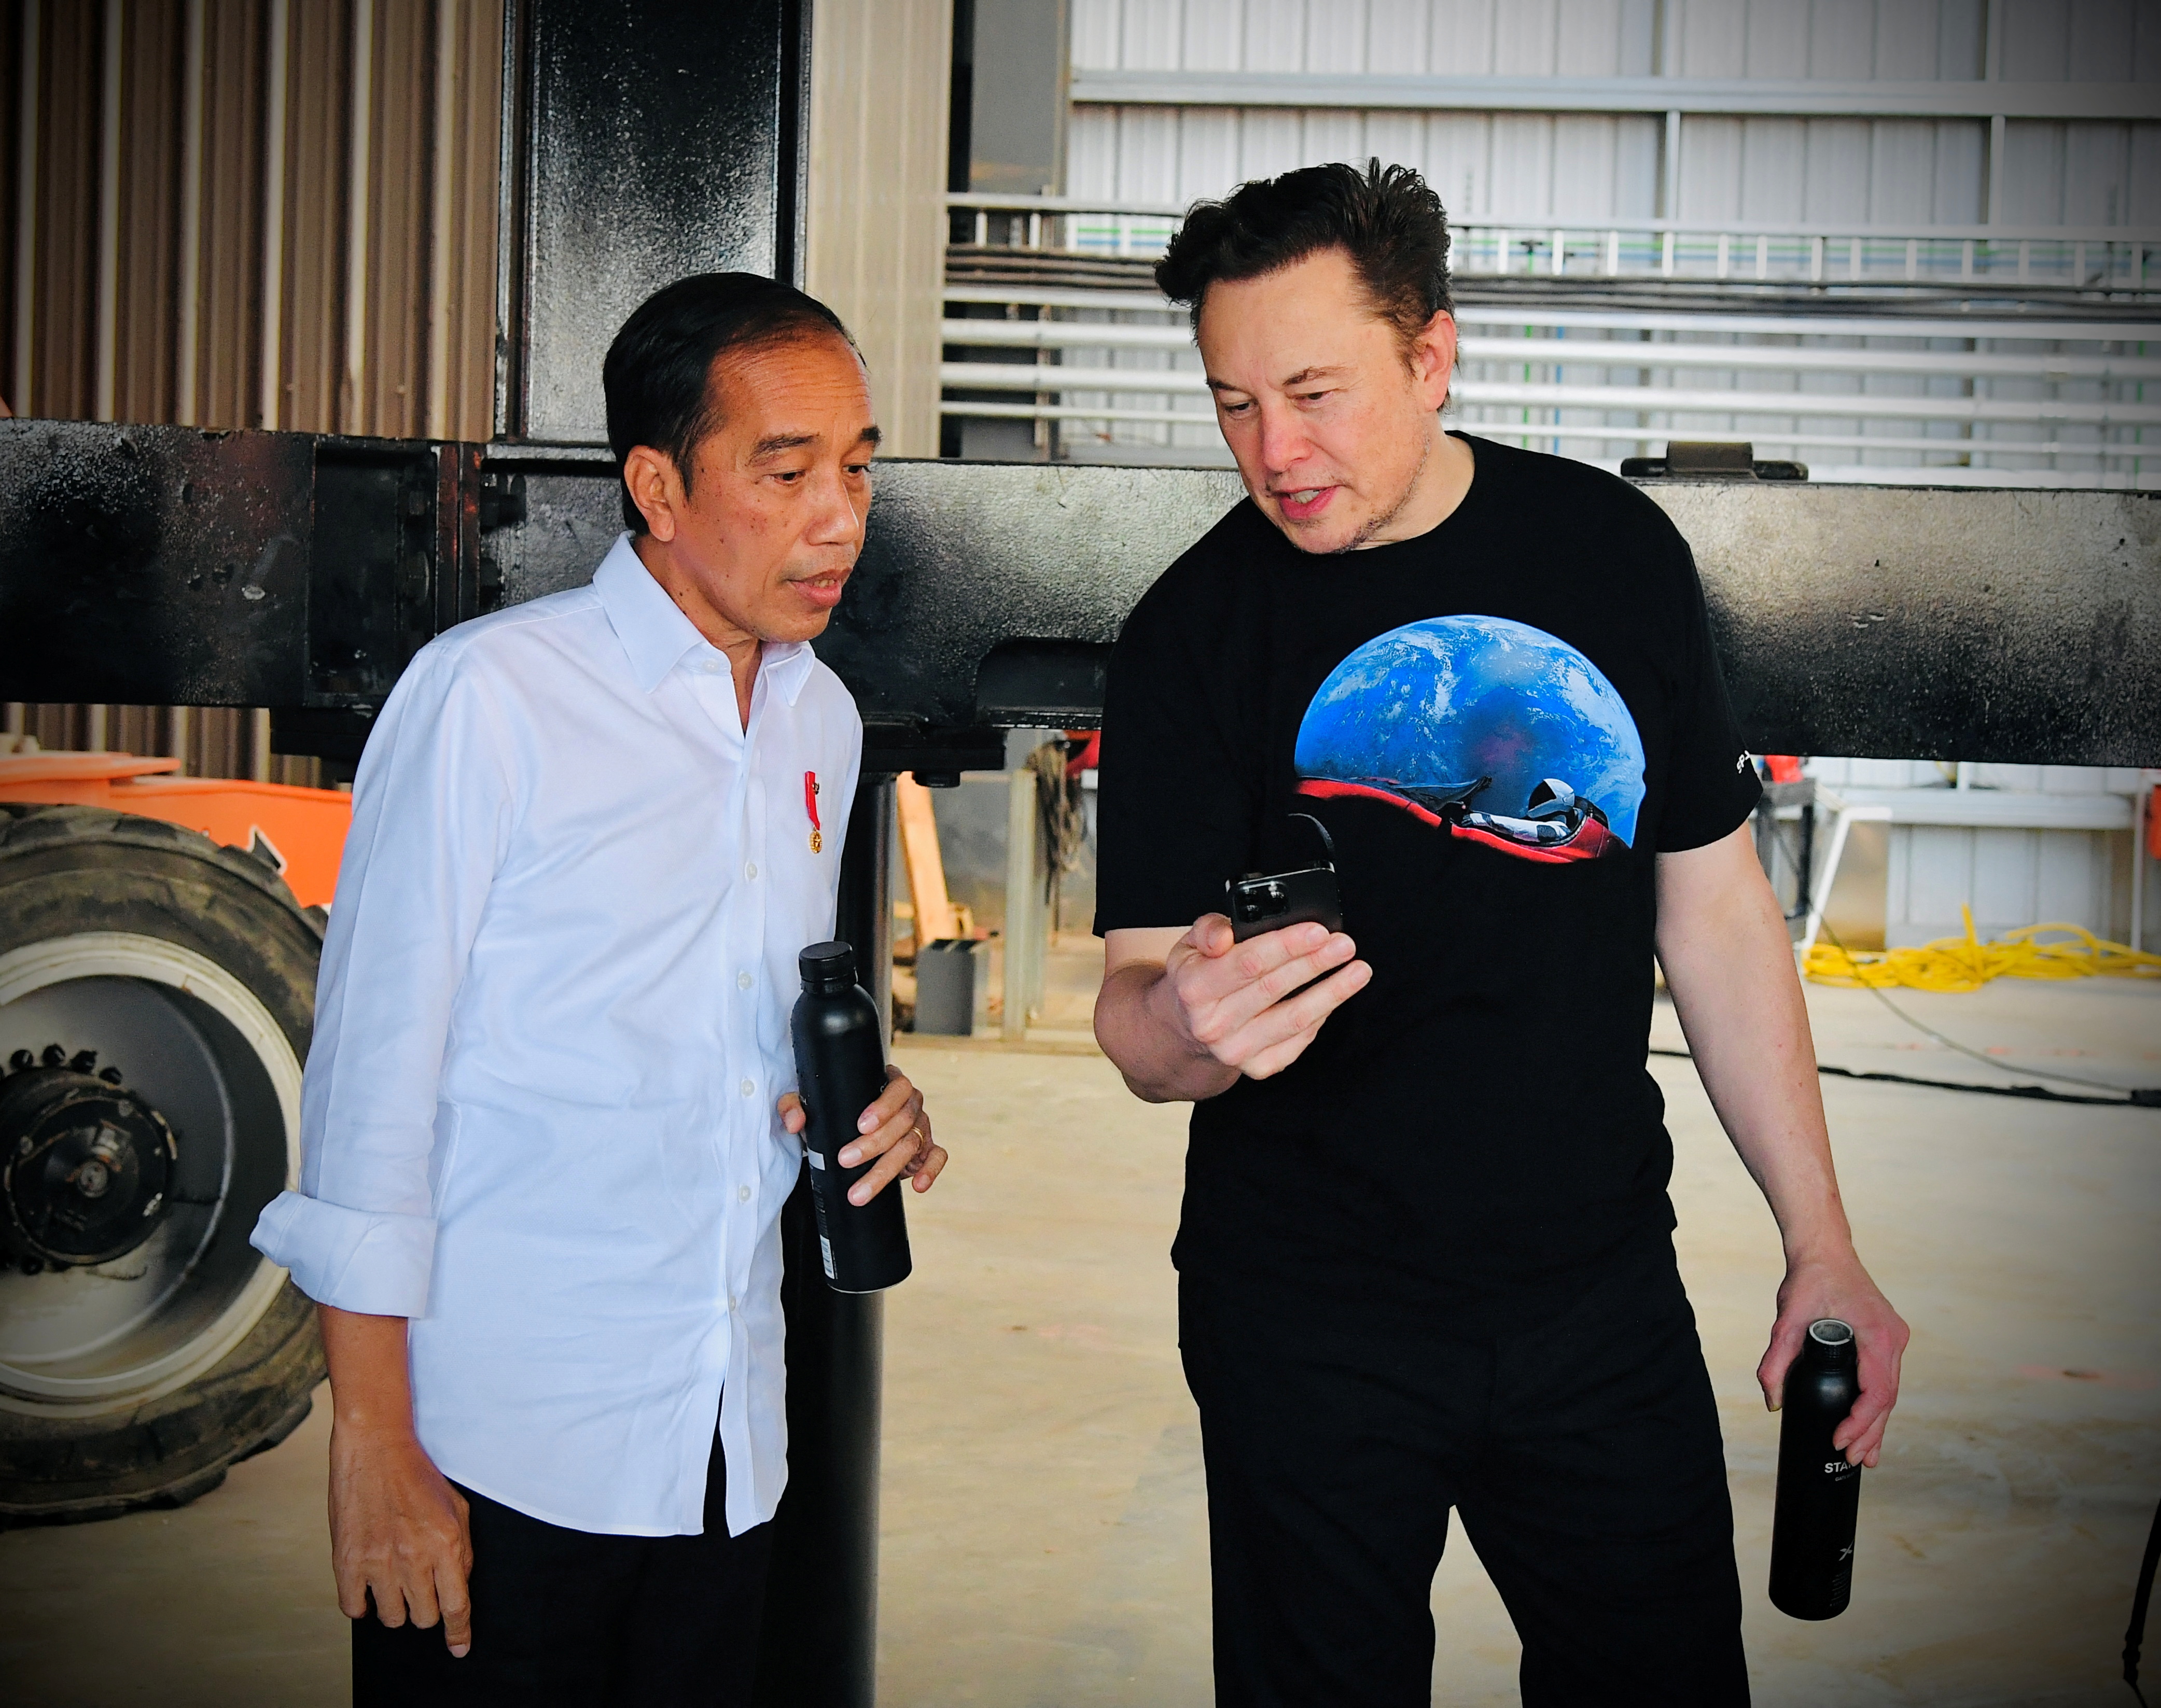 Indonesian President Joko Widodo talks with Founder and CEO of Tesla Motors Elon Musk during their meeting at the SpaceX launch site in Boca Chica, Texas